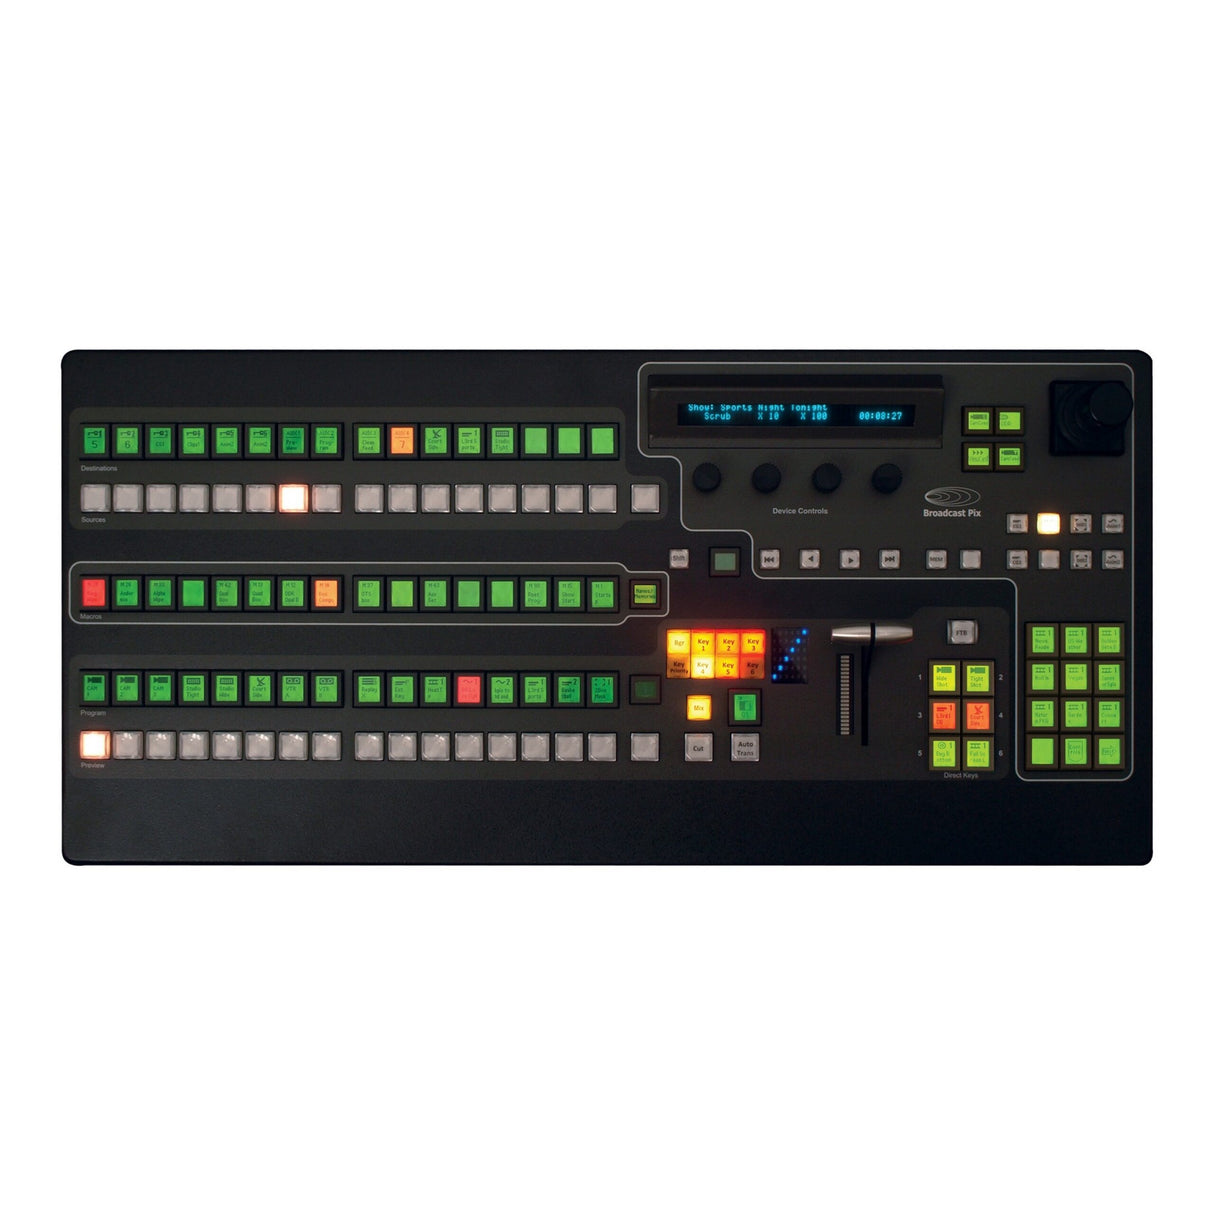 Broadcast Pix 1 M/E 2000 Control Panel for FX, MX, GX Systems